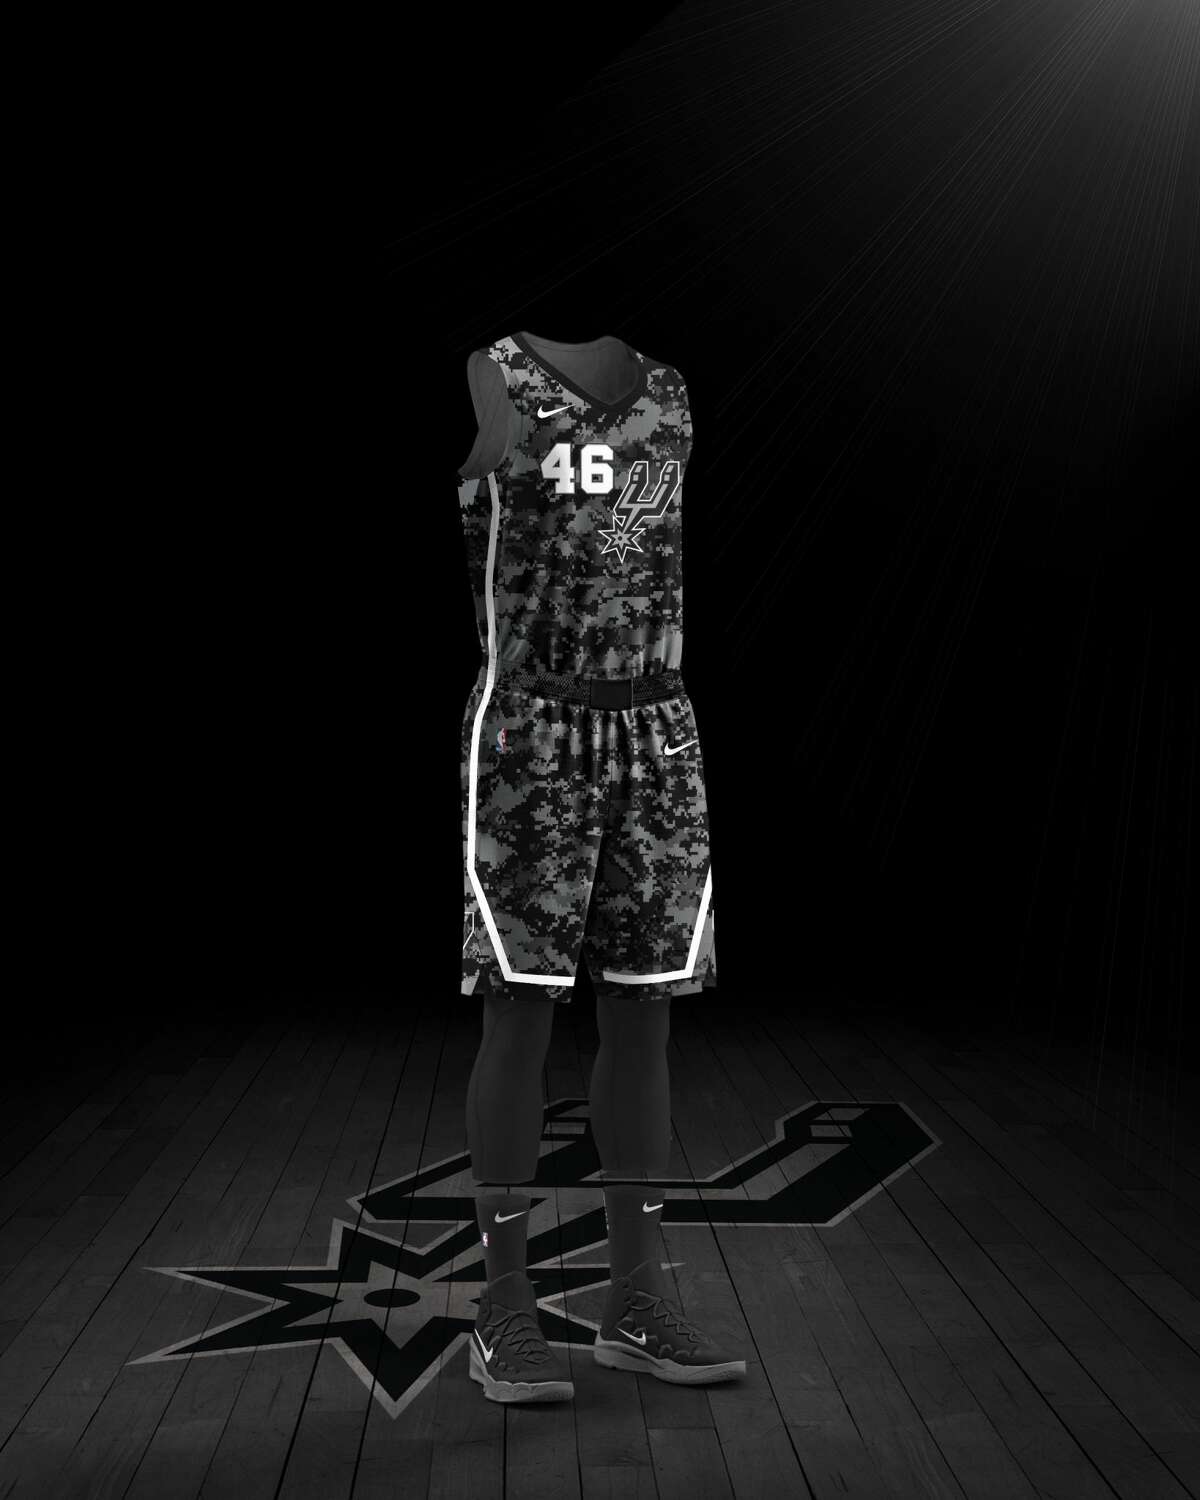 Spurs announce another camouflage jersey as this season's Nike City Edition  uniform